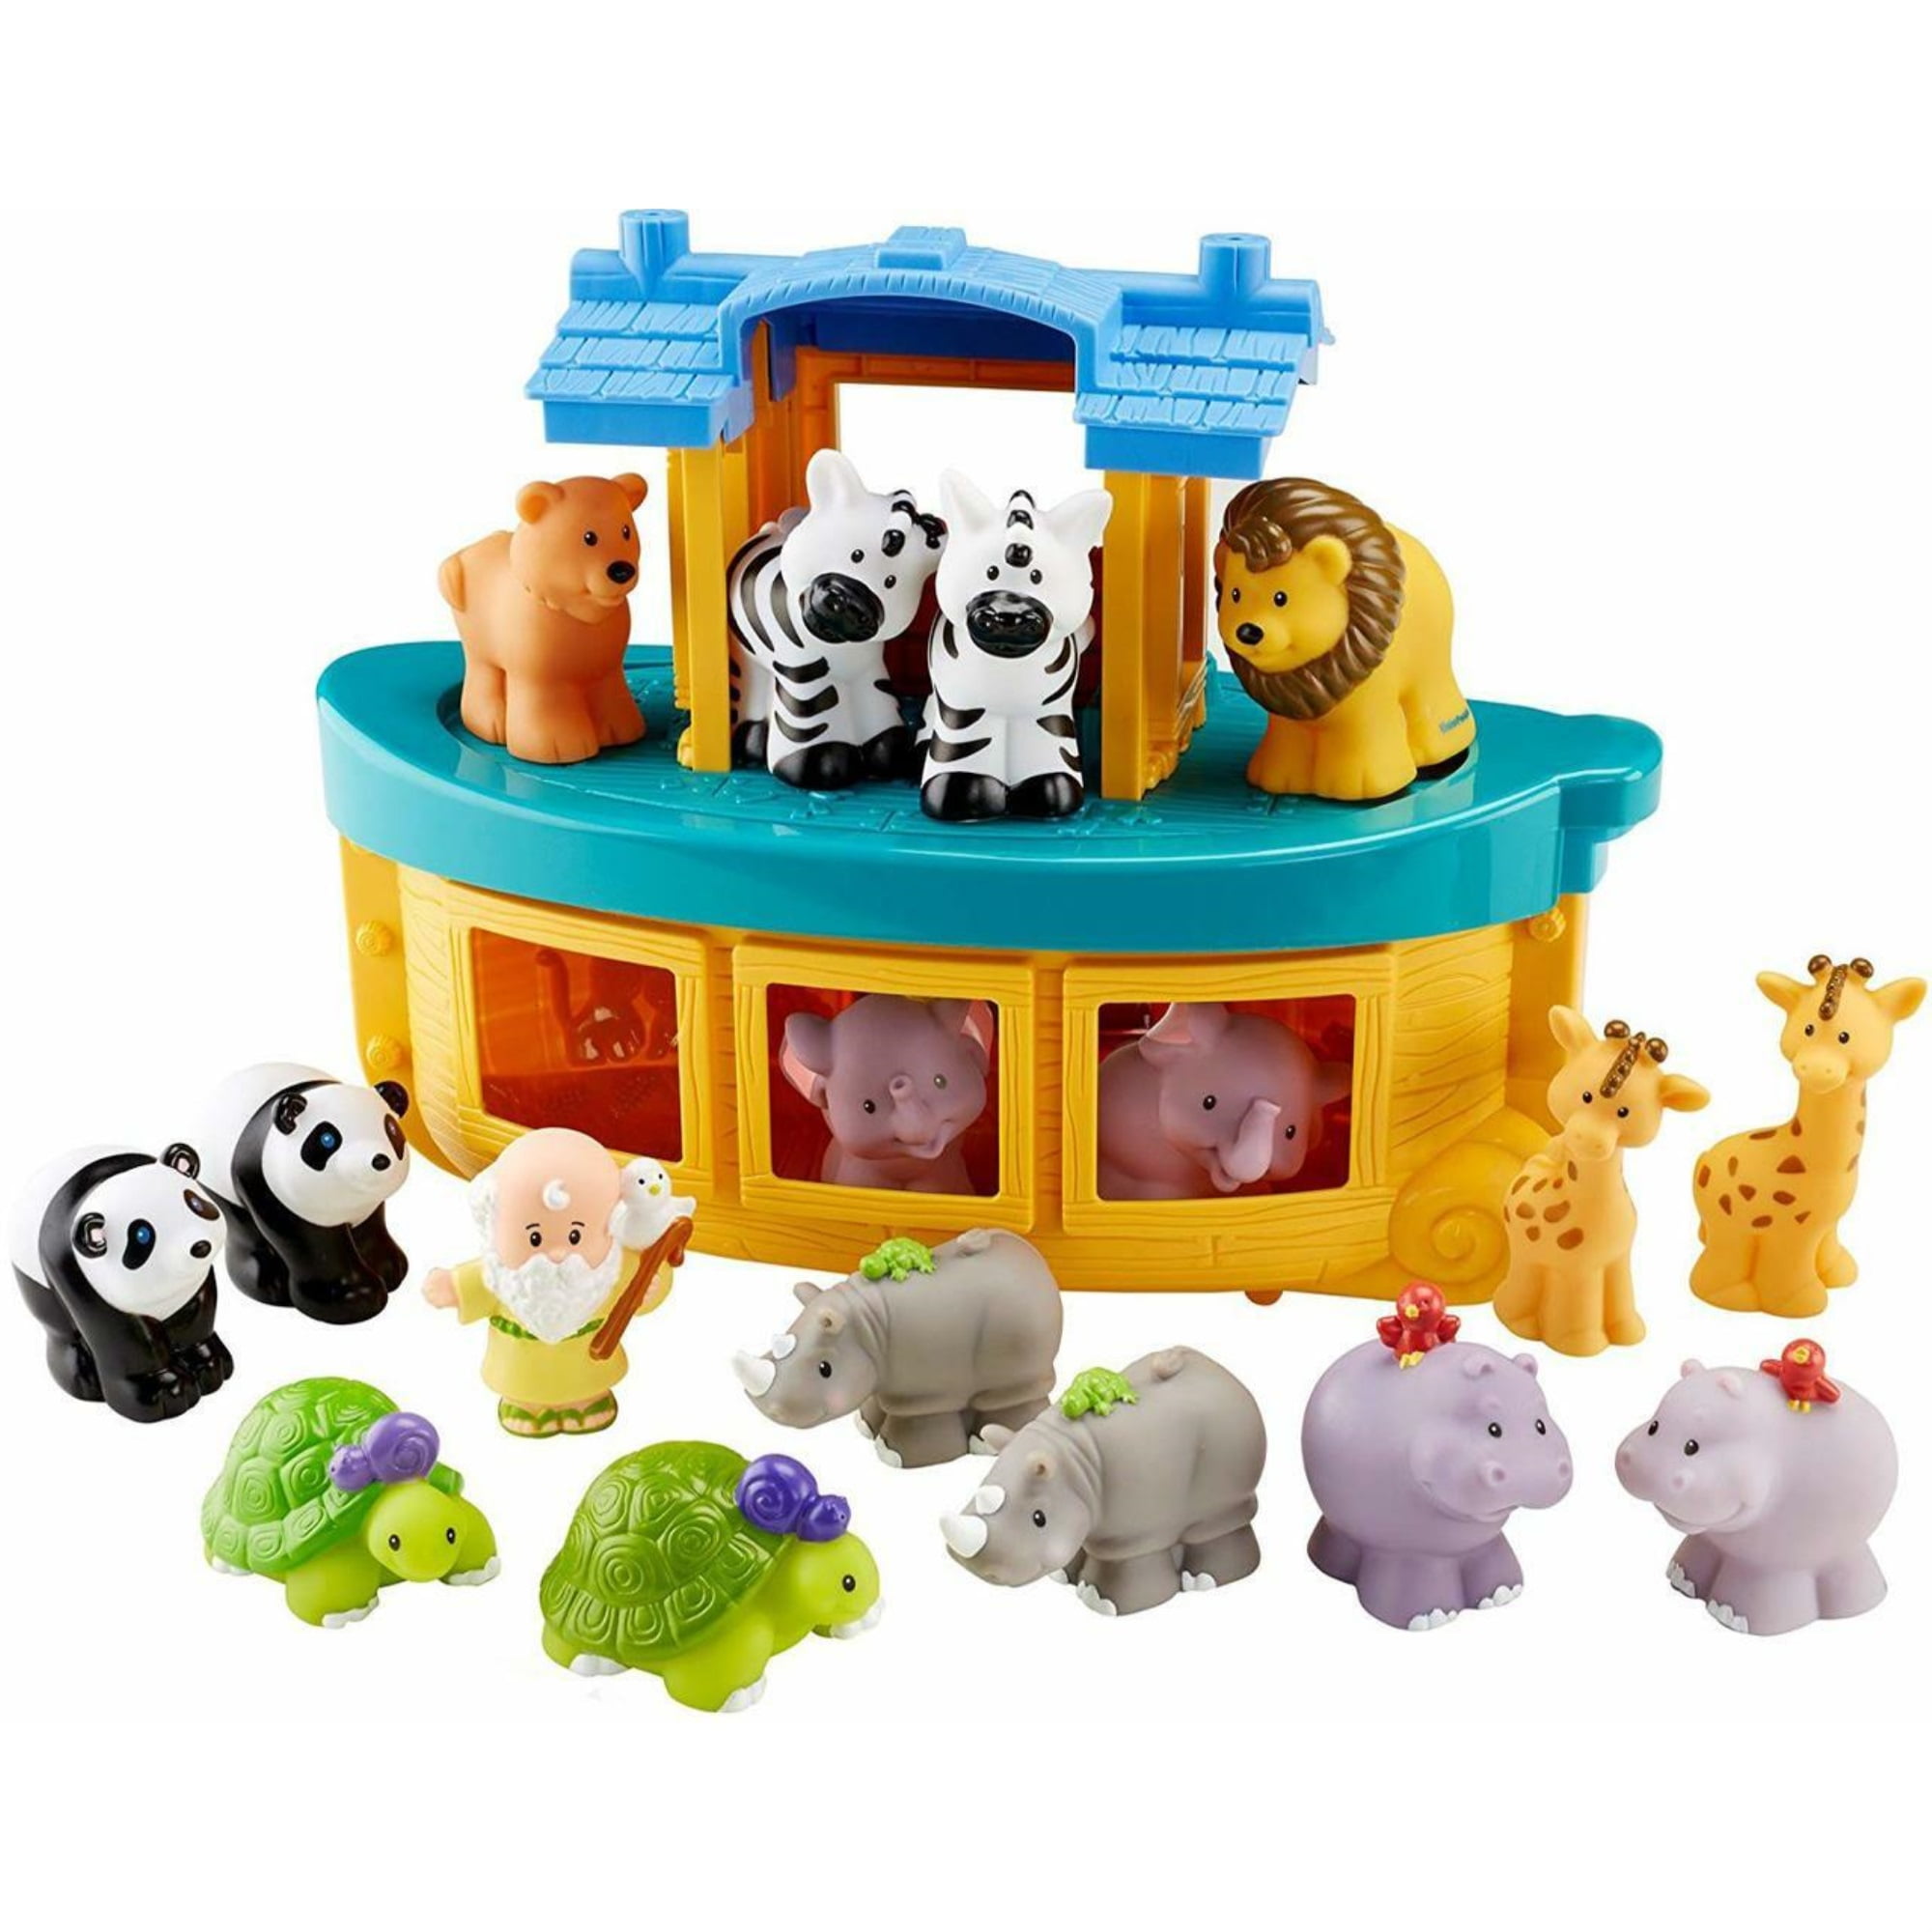 Details about   Fisher Price Little People zoo Noah's Ark pair Animal Touch and Feel Peacock Toy 